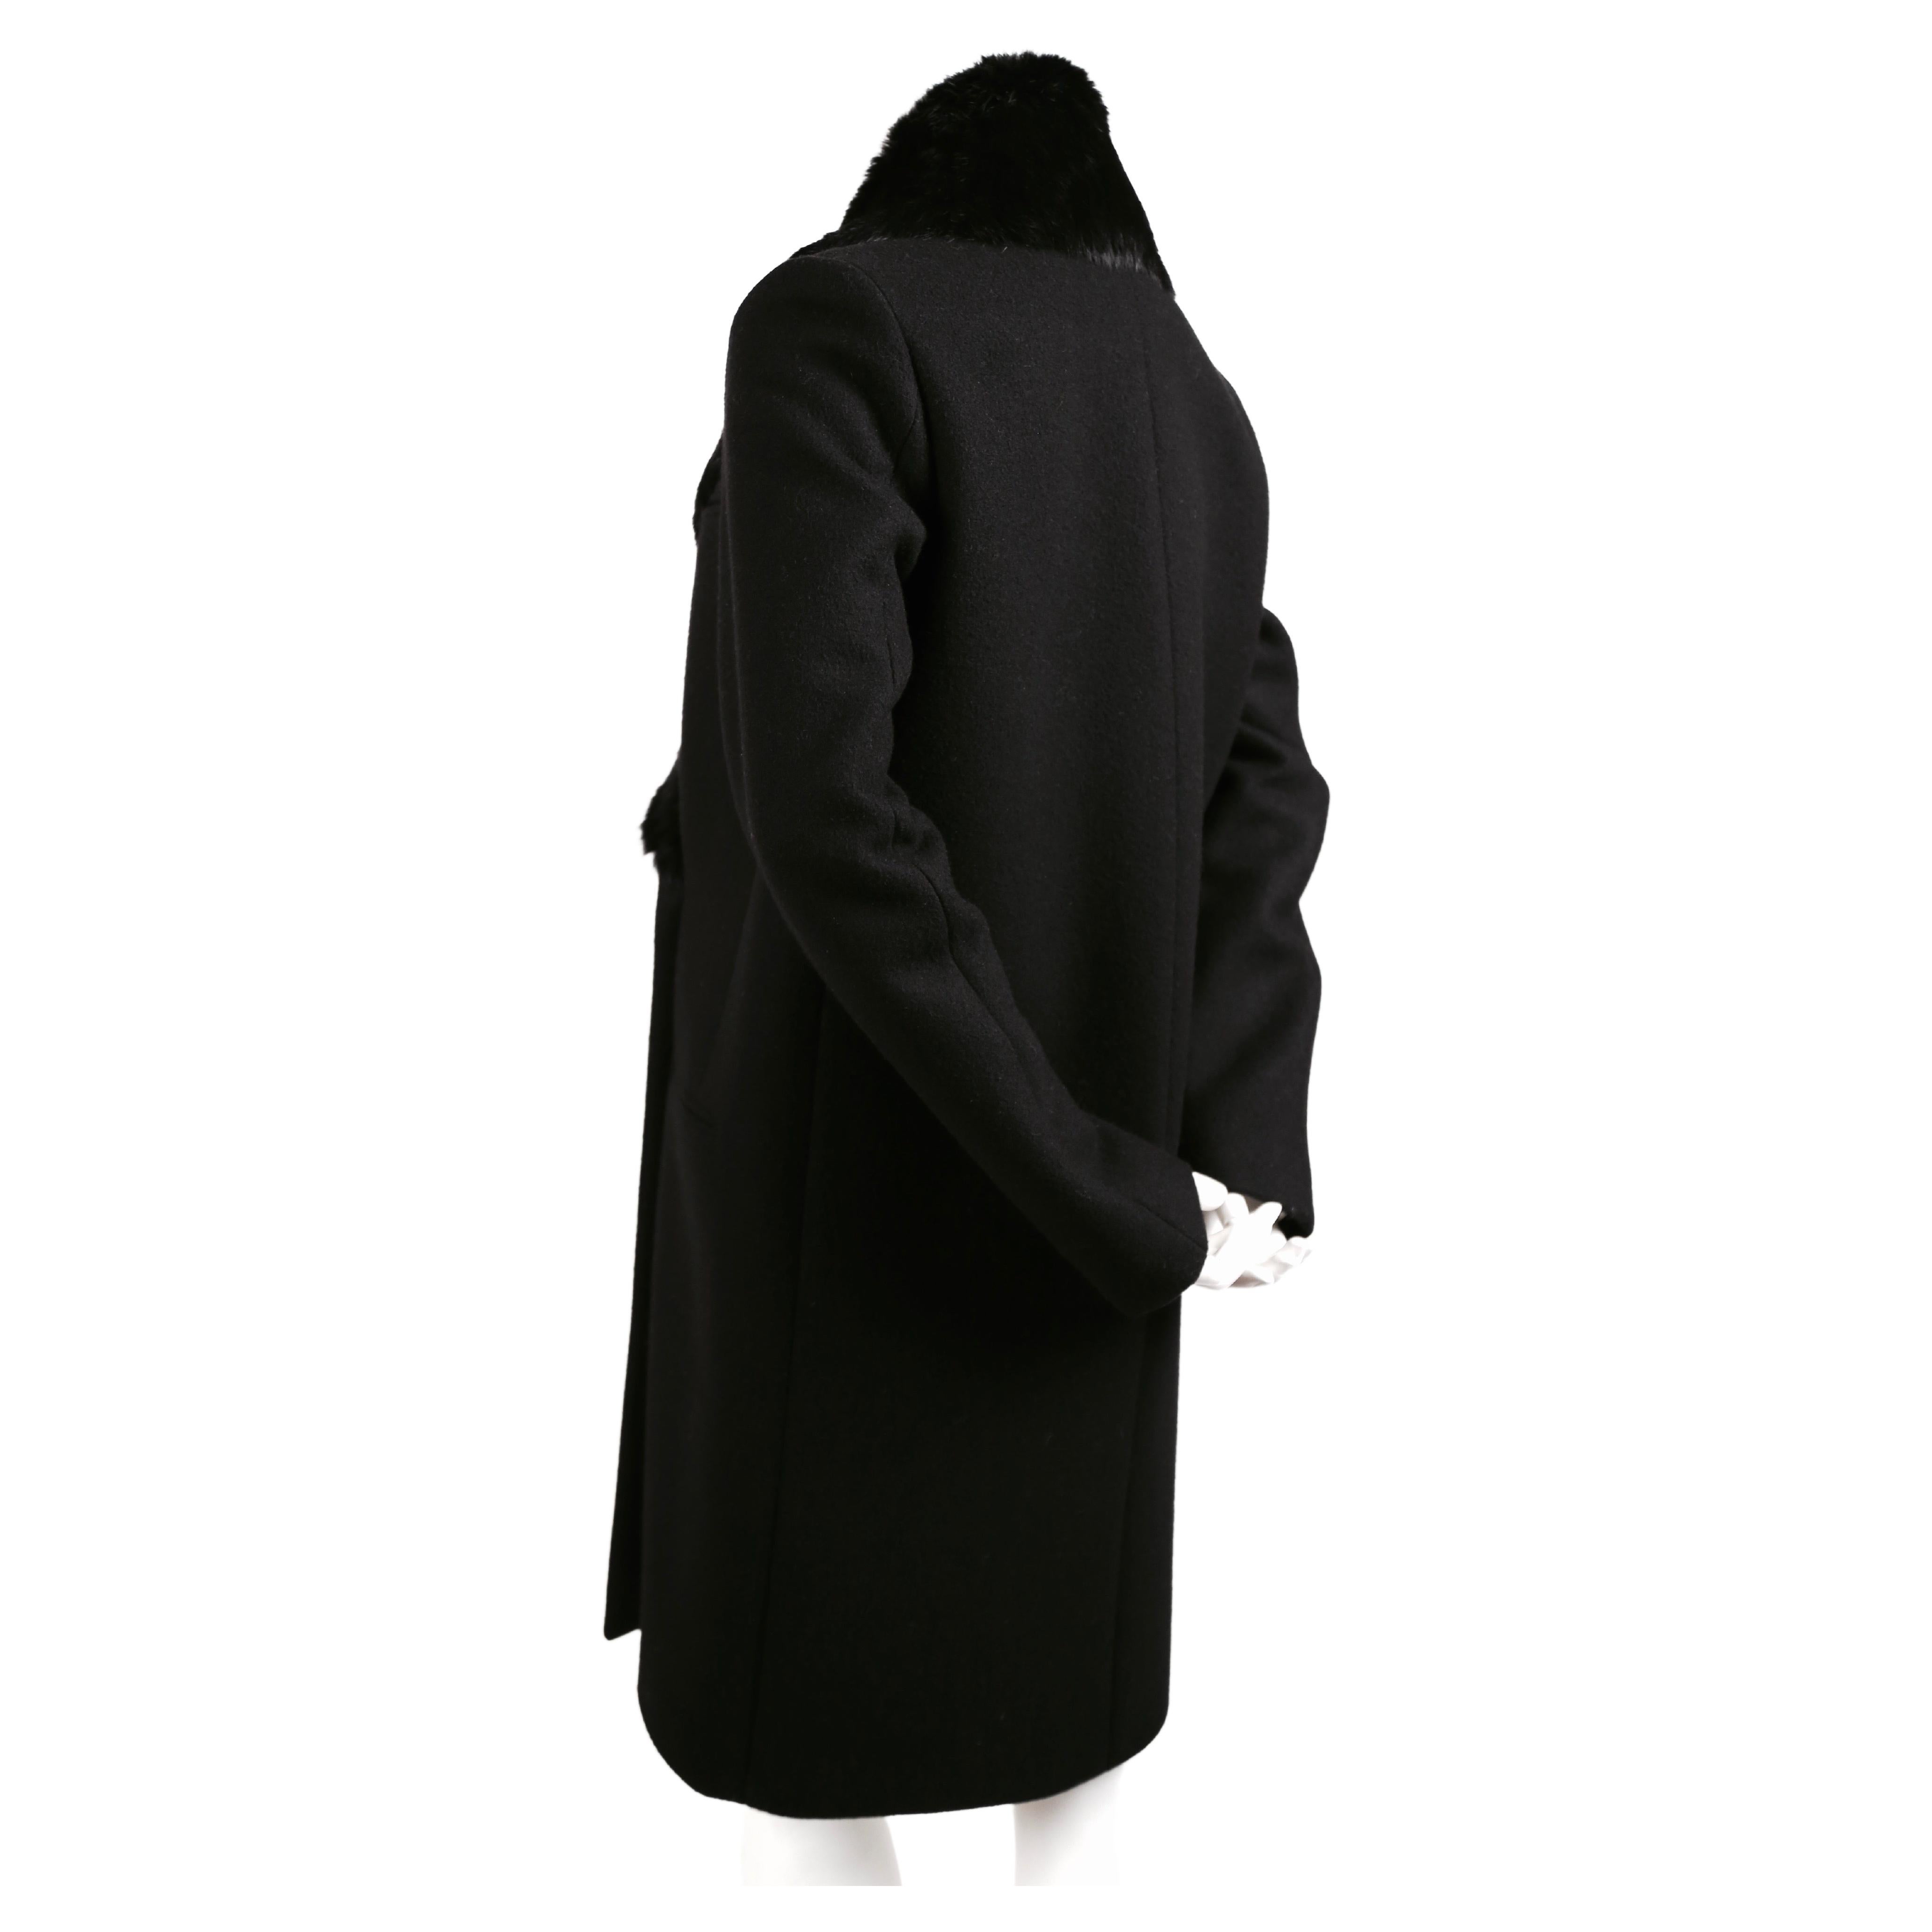 Jet-black, wool crombie coat with removable rabbit collar designed by Phoebe Philo for Celine. French size 38. Approximate measurements: shoulder 16